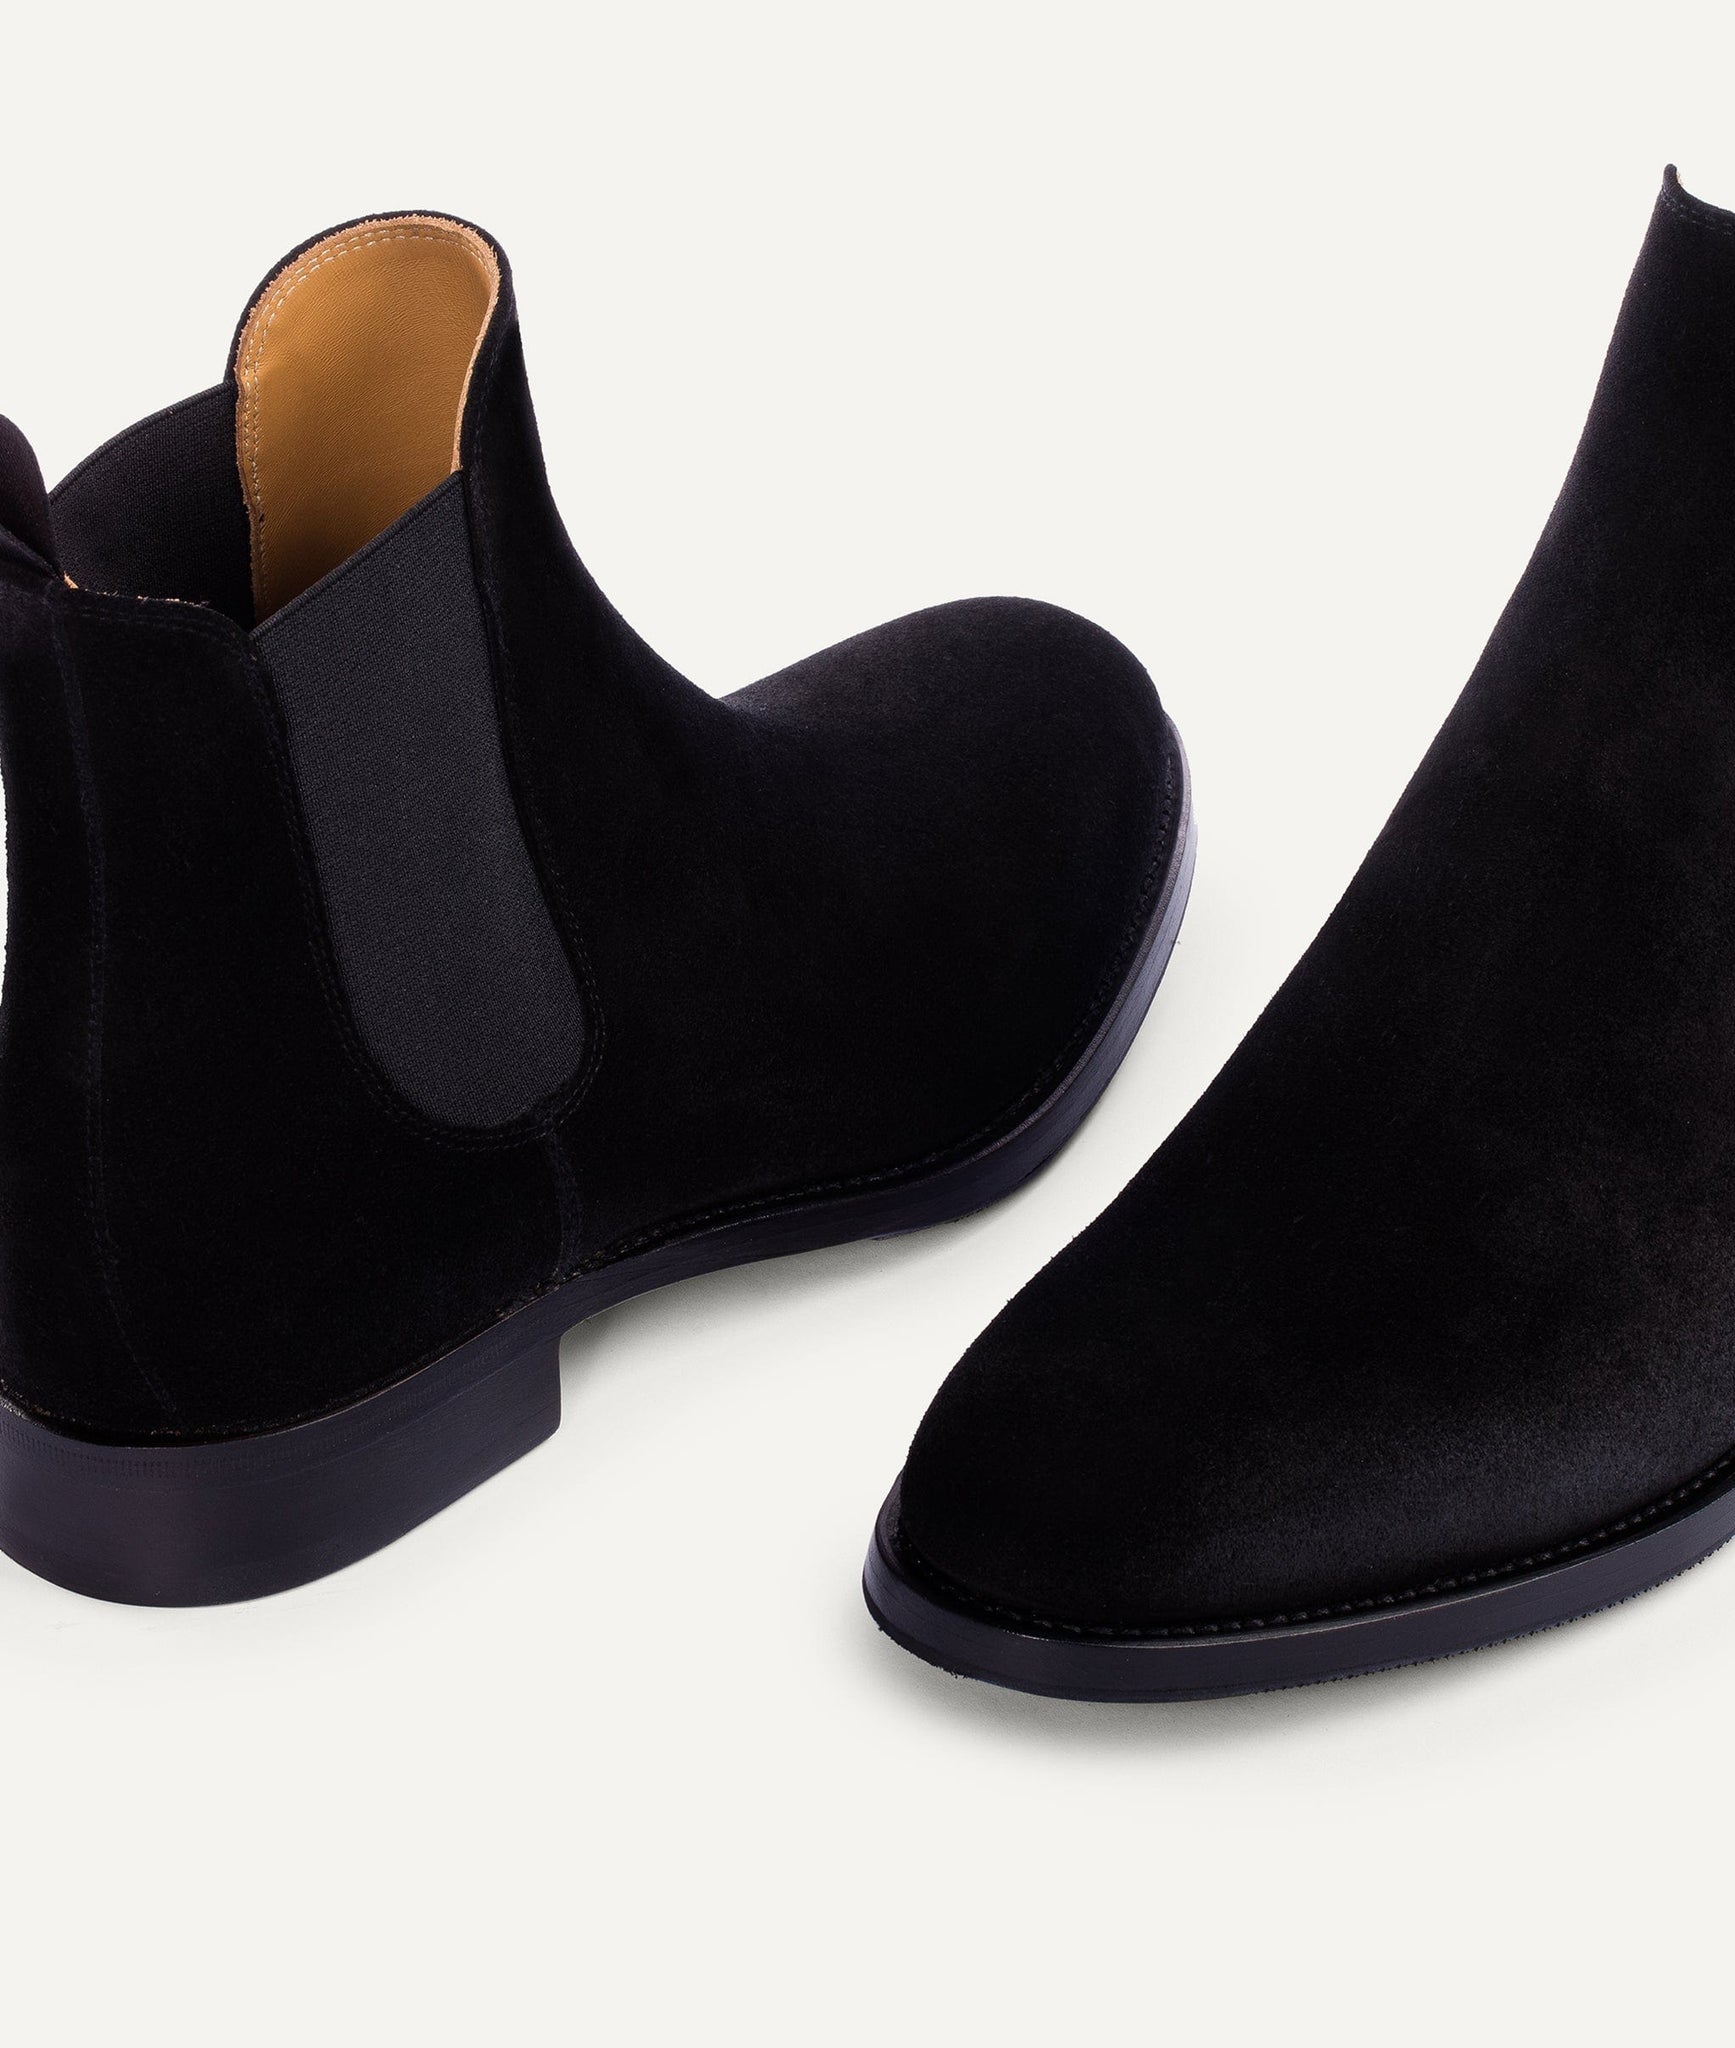 Chelsea Boot in Suede Leather